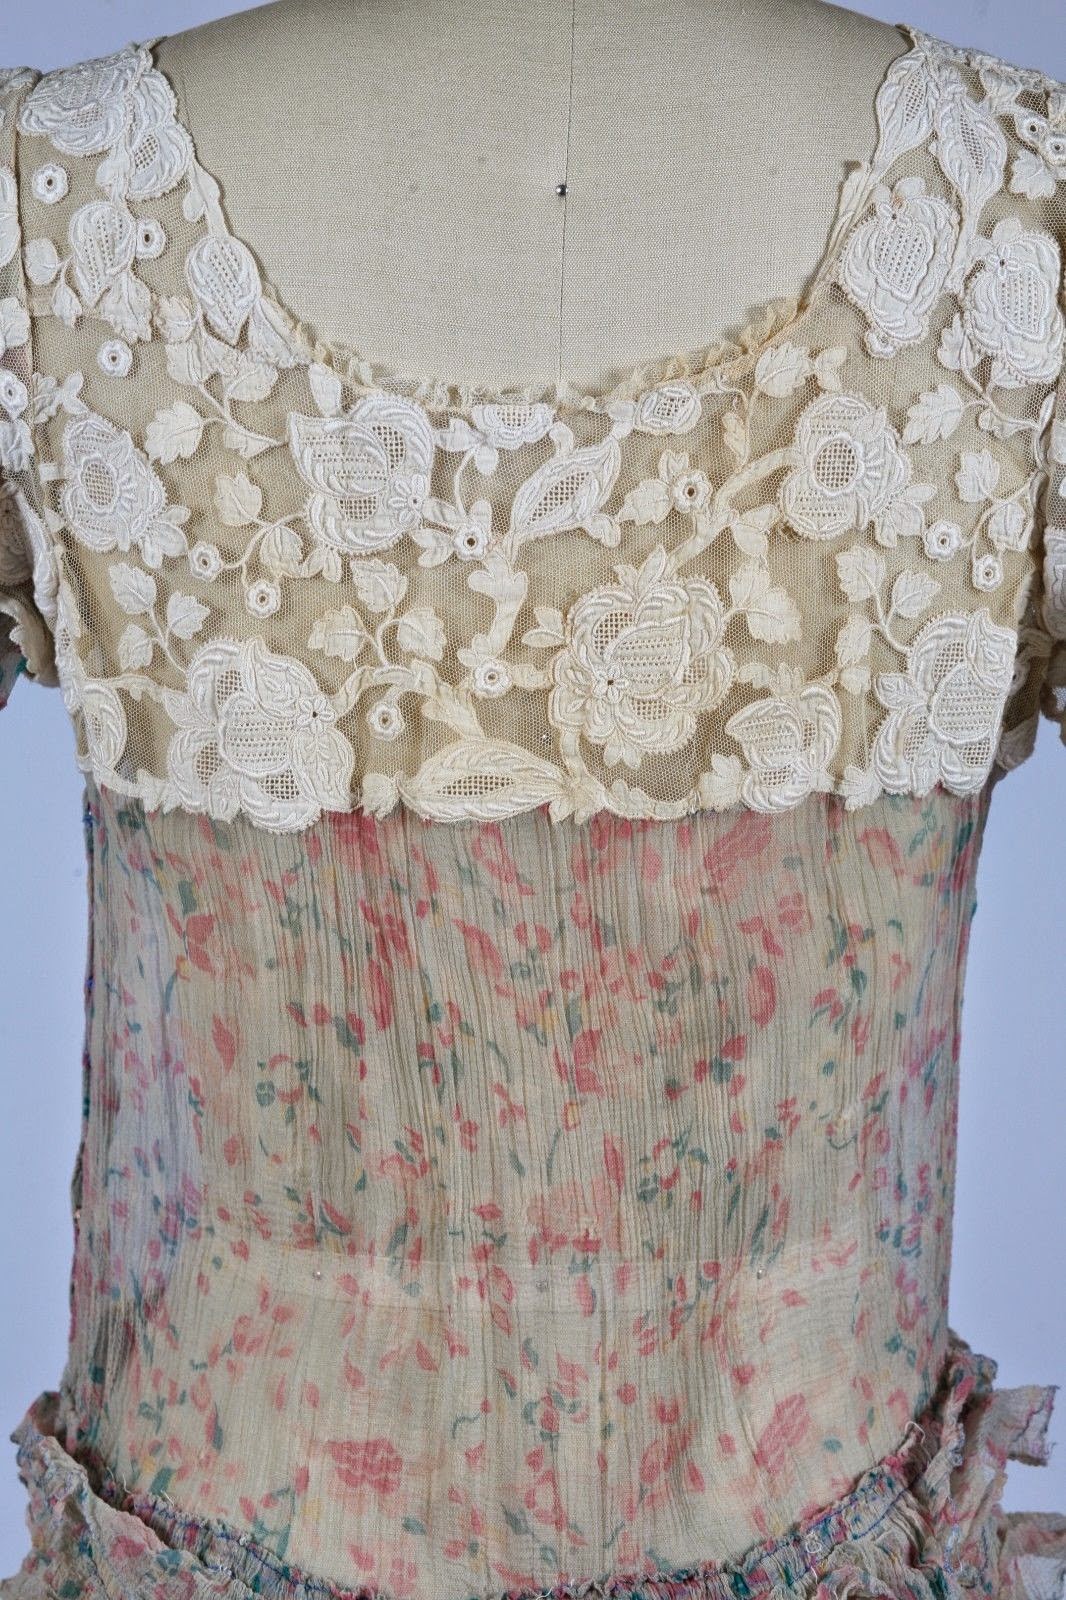 All The Pretty Dresses: Late 1920's/early 1930's Floral Print Sheer Dress